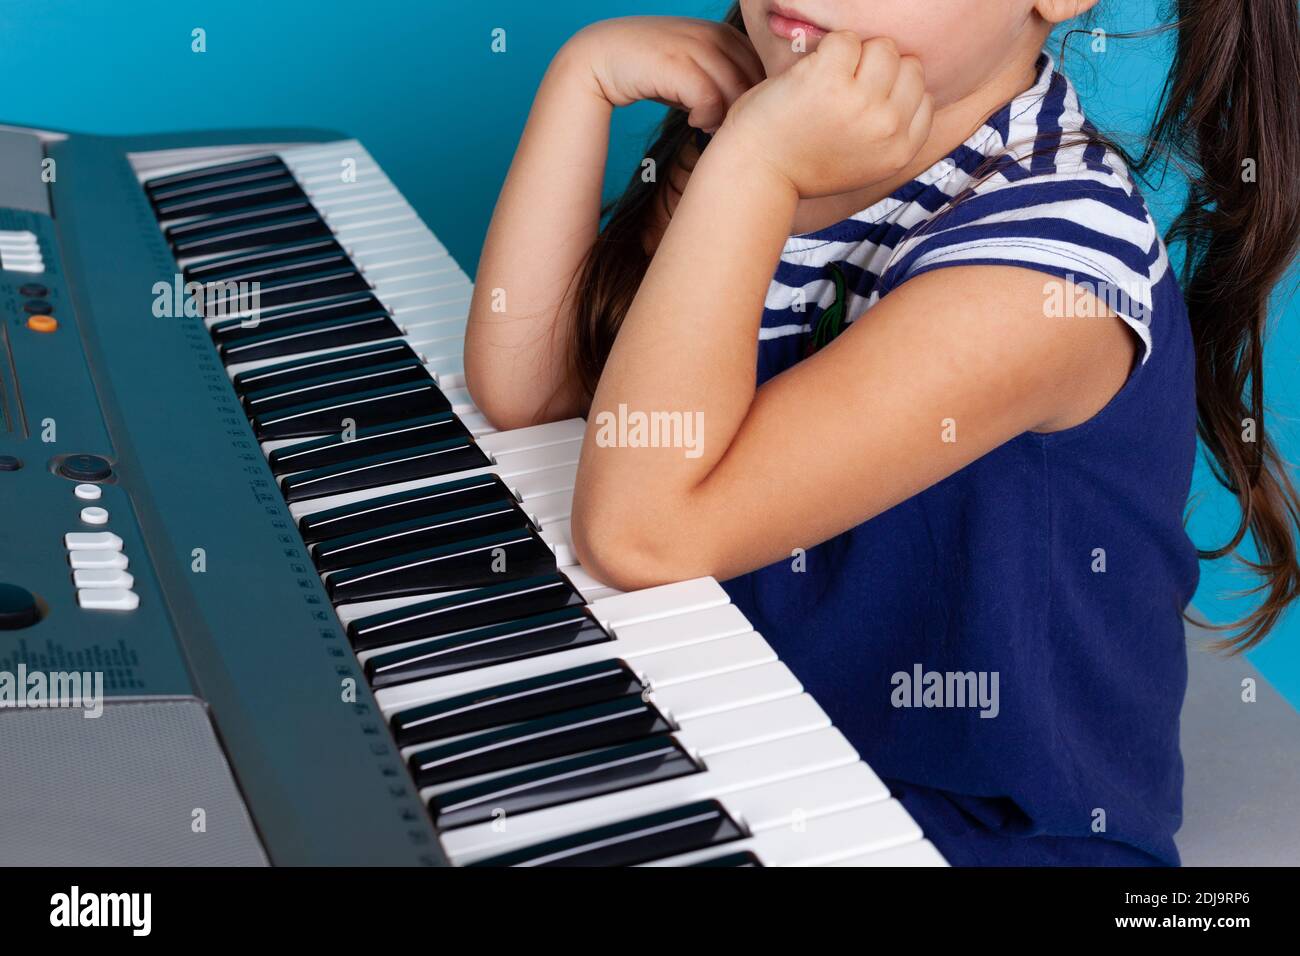 close-up of a child's elbows pressing or playing music on the piano keys, limited options, isolated on a blue background Stock Photo